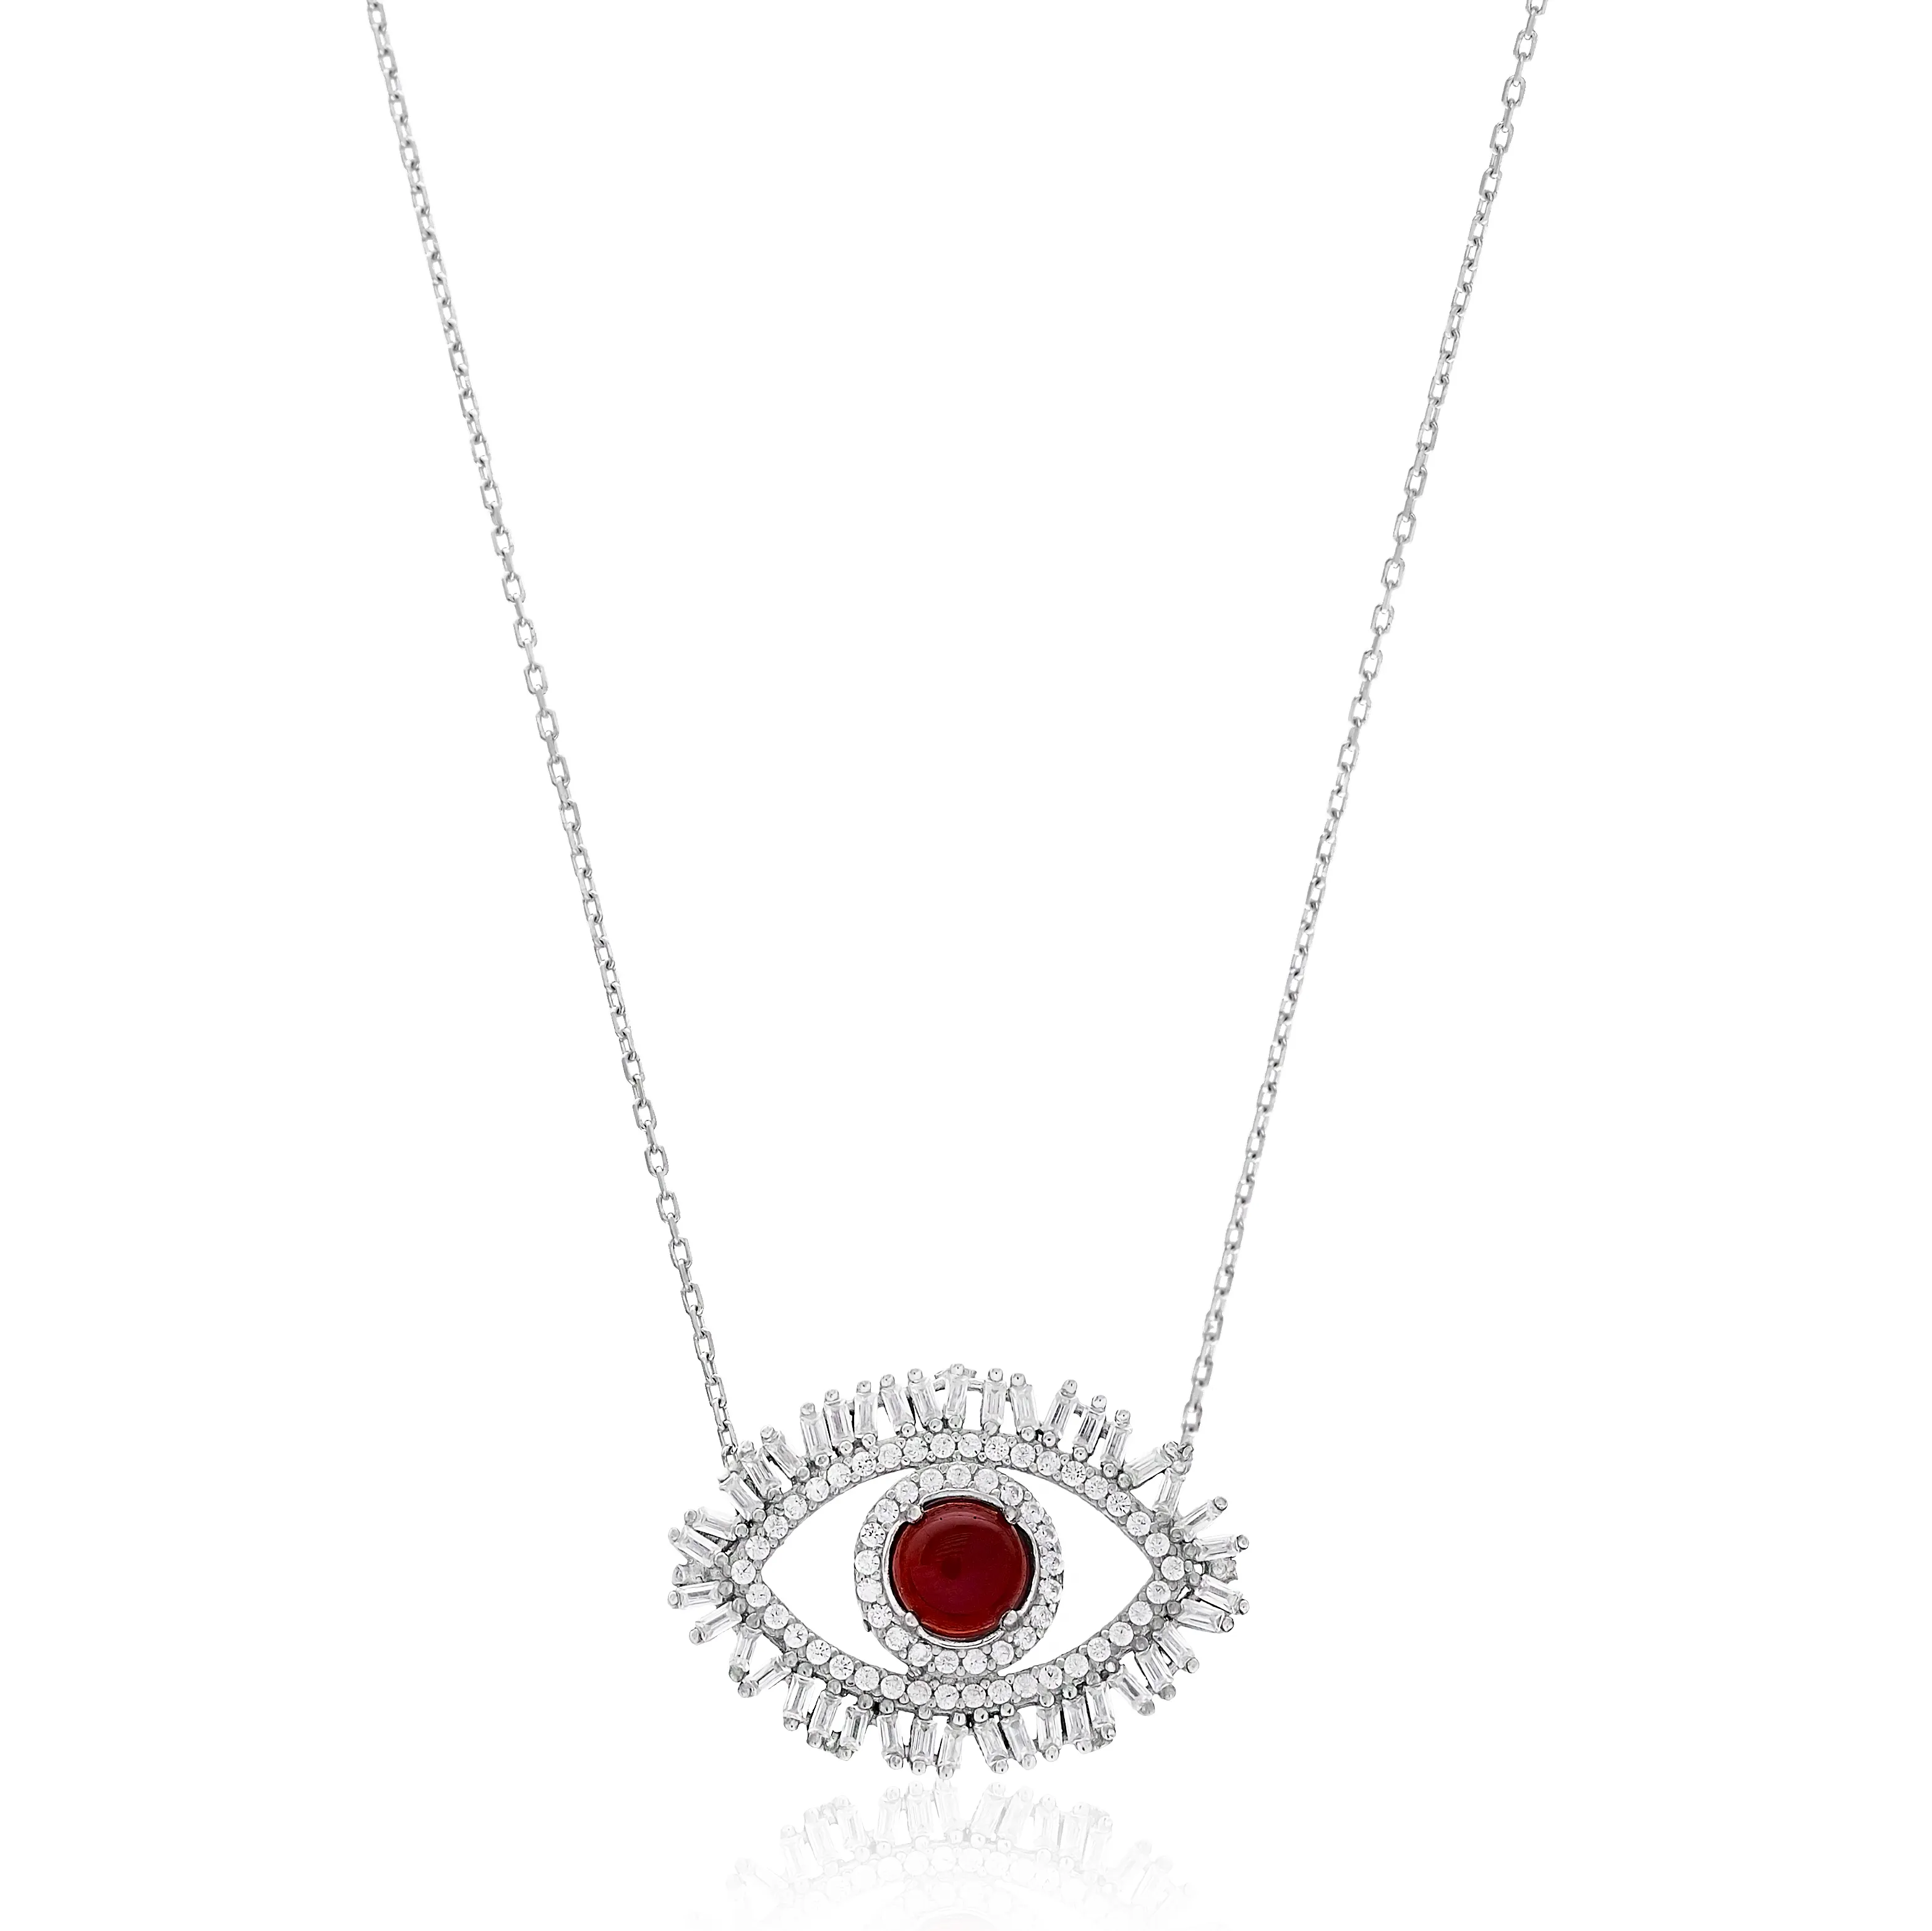 Eye Shape Necklace Large Size Of Eye of Evil Charm Coral necklace 925 Sterling Silver Jewelry